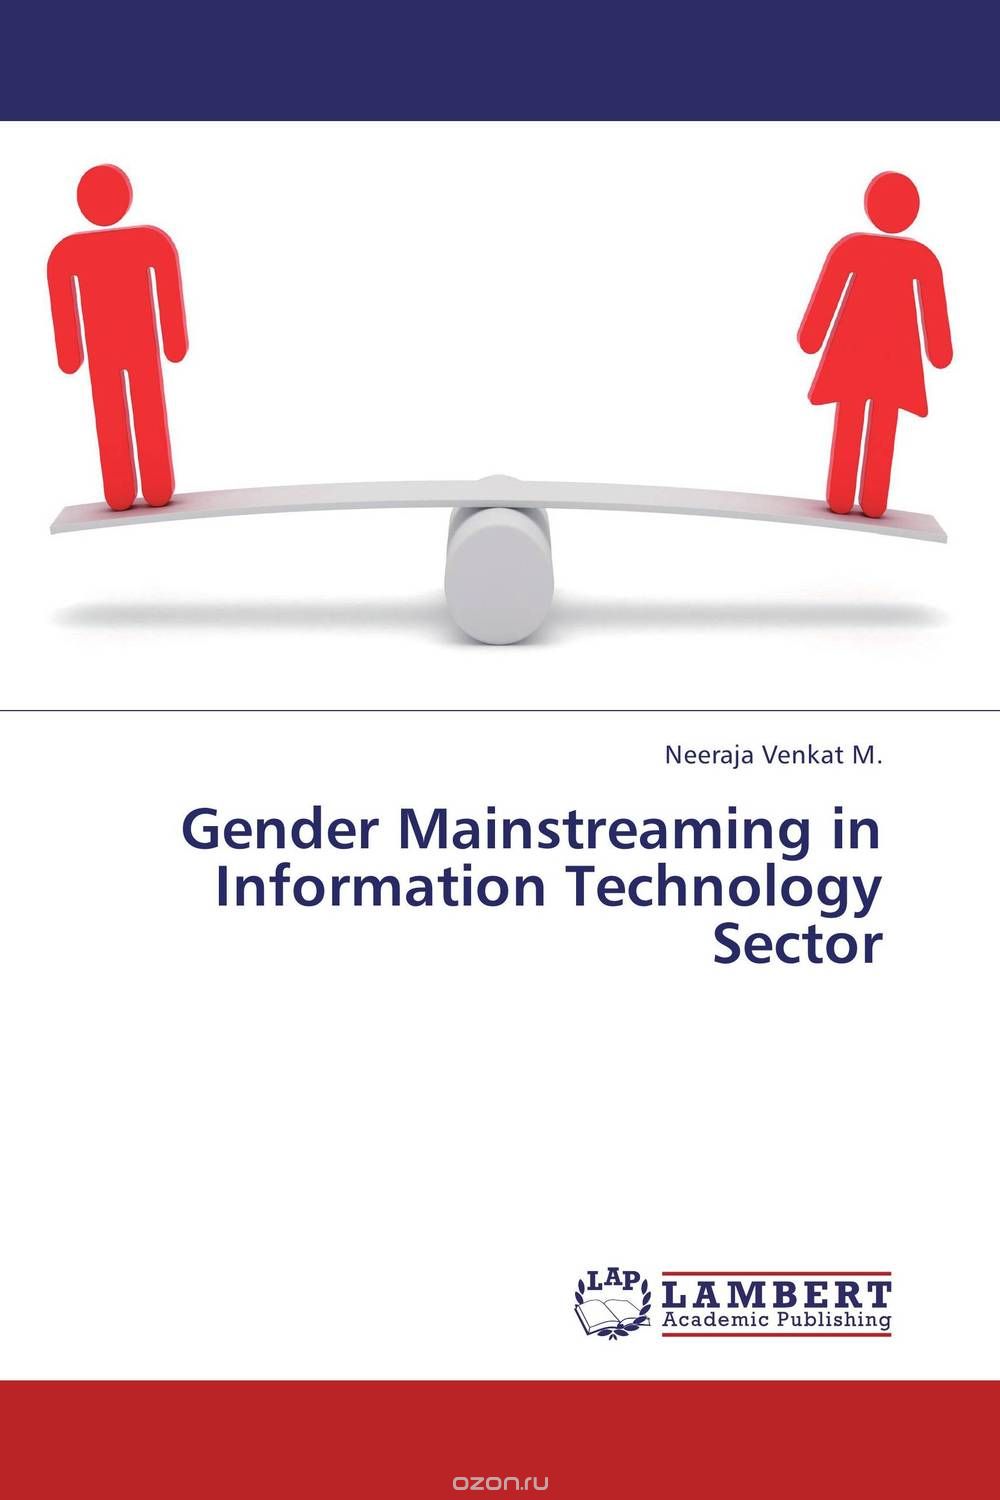 Gender Mainstreaming in Information Technology Sector